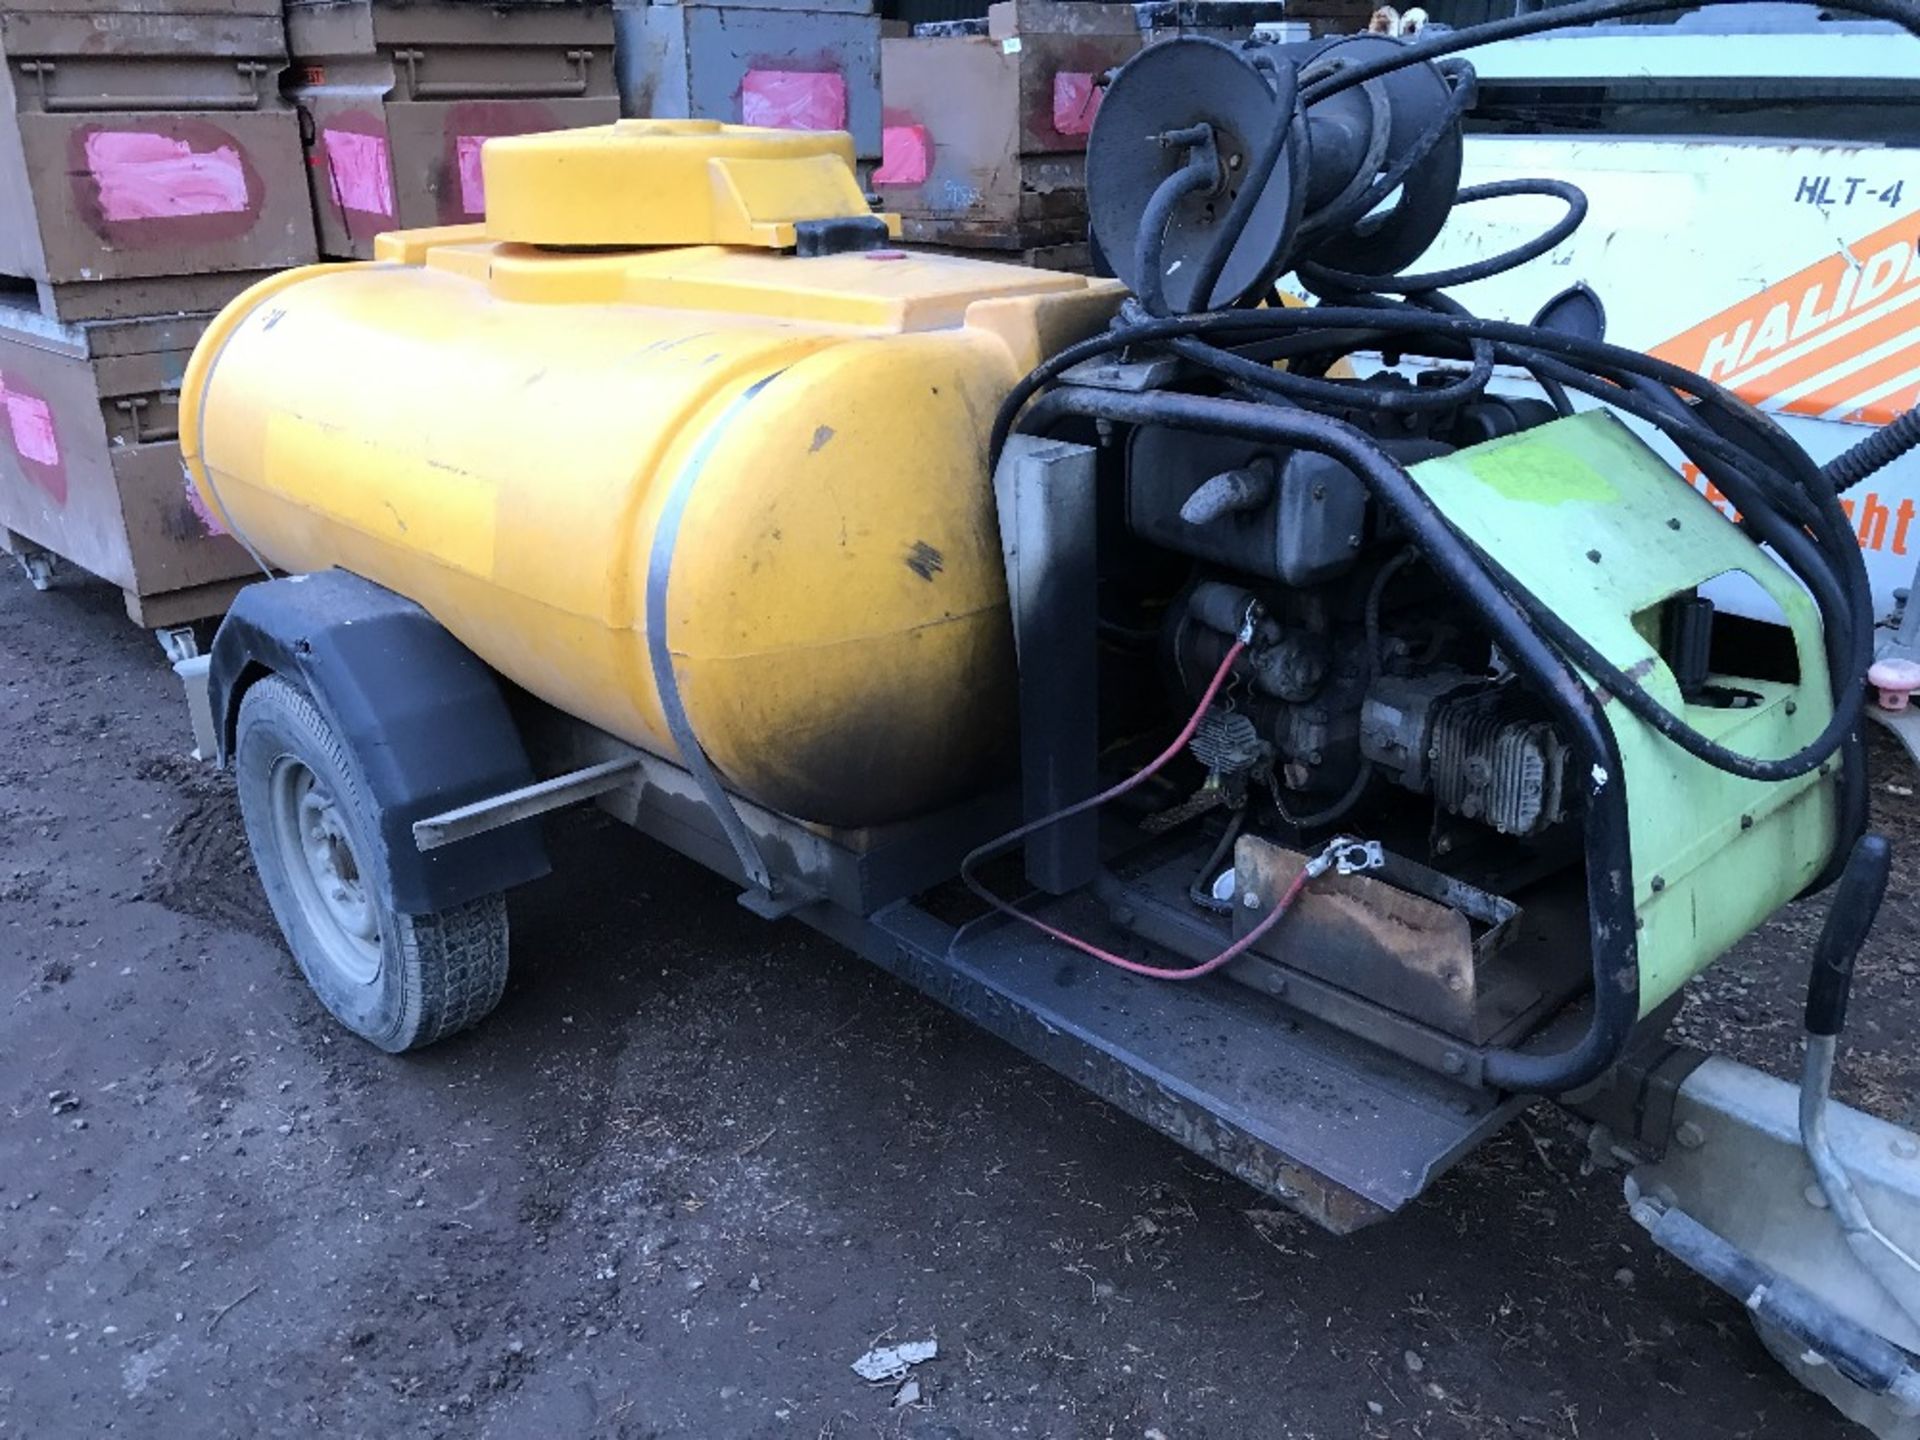 YANMAR ENGINED PRESSURE WASHER BOWSER, WHEN TESTED STARTED BUT CUT OUT...FUEL?? MAY NEED SOME